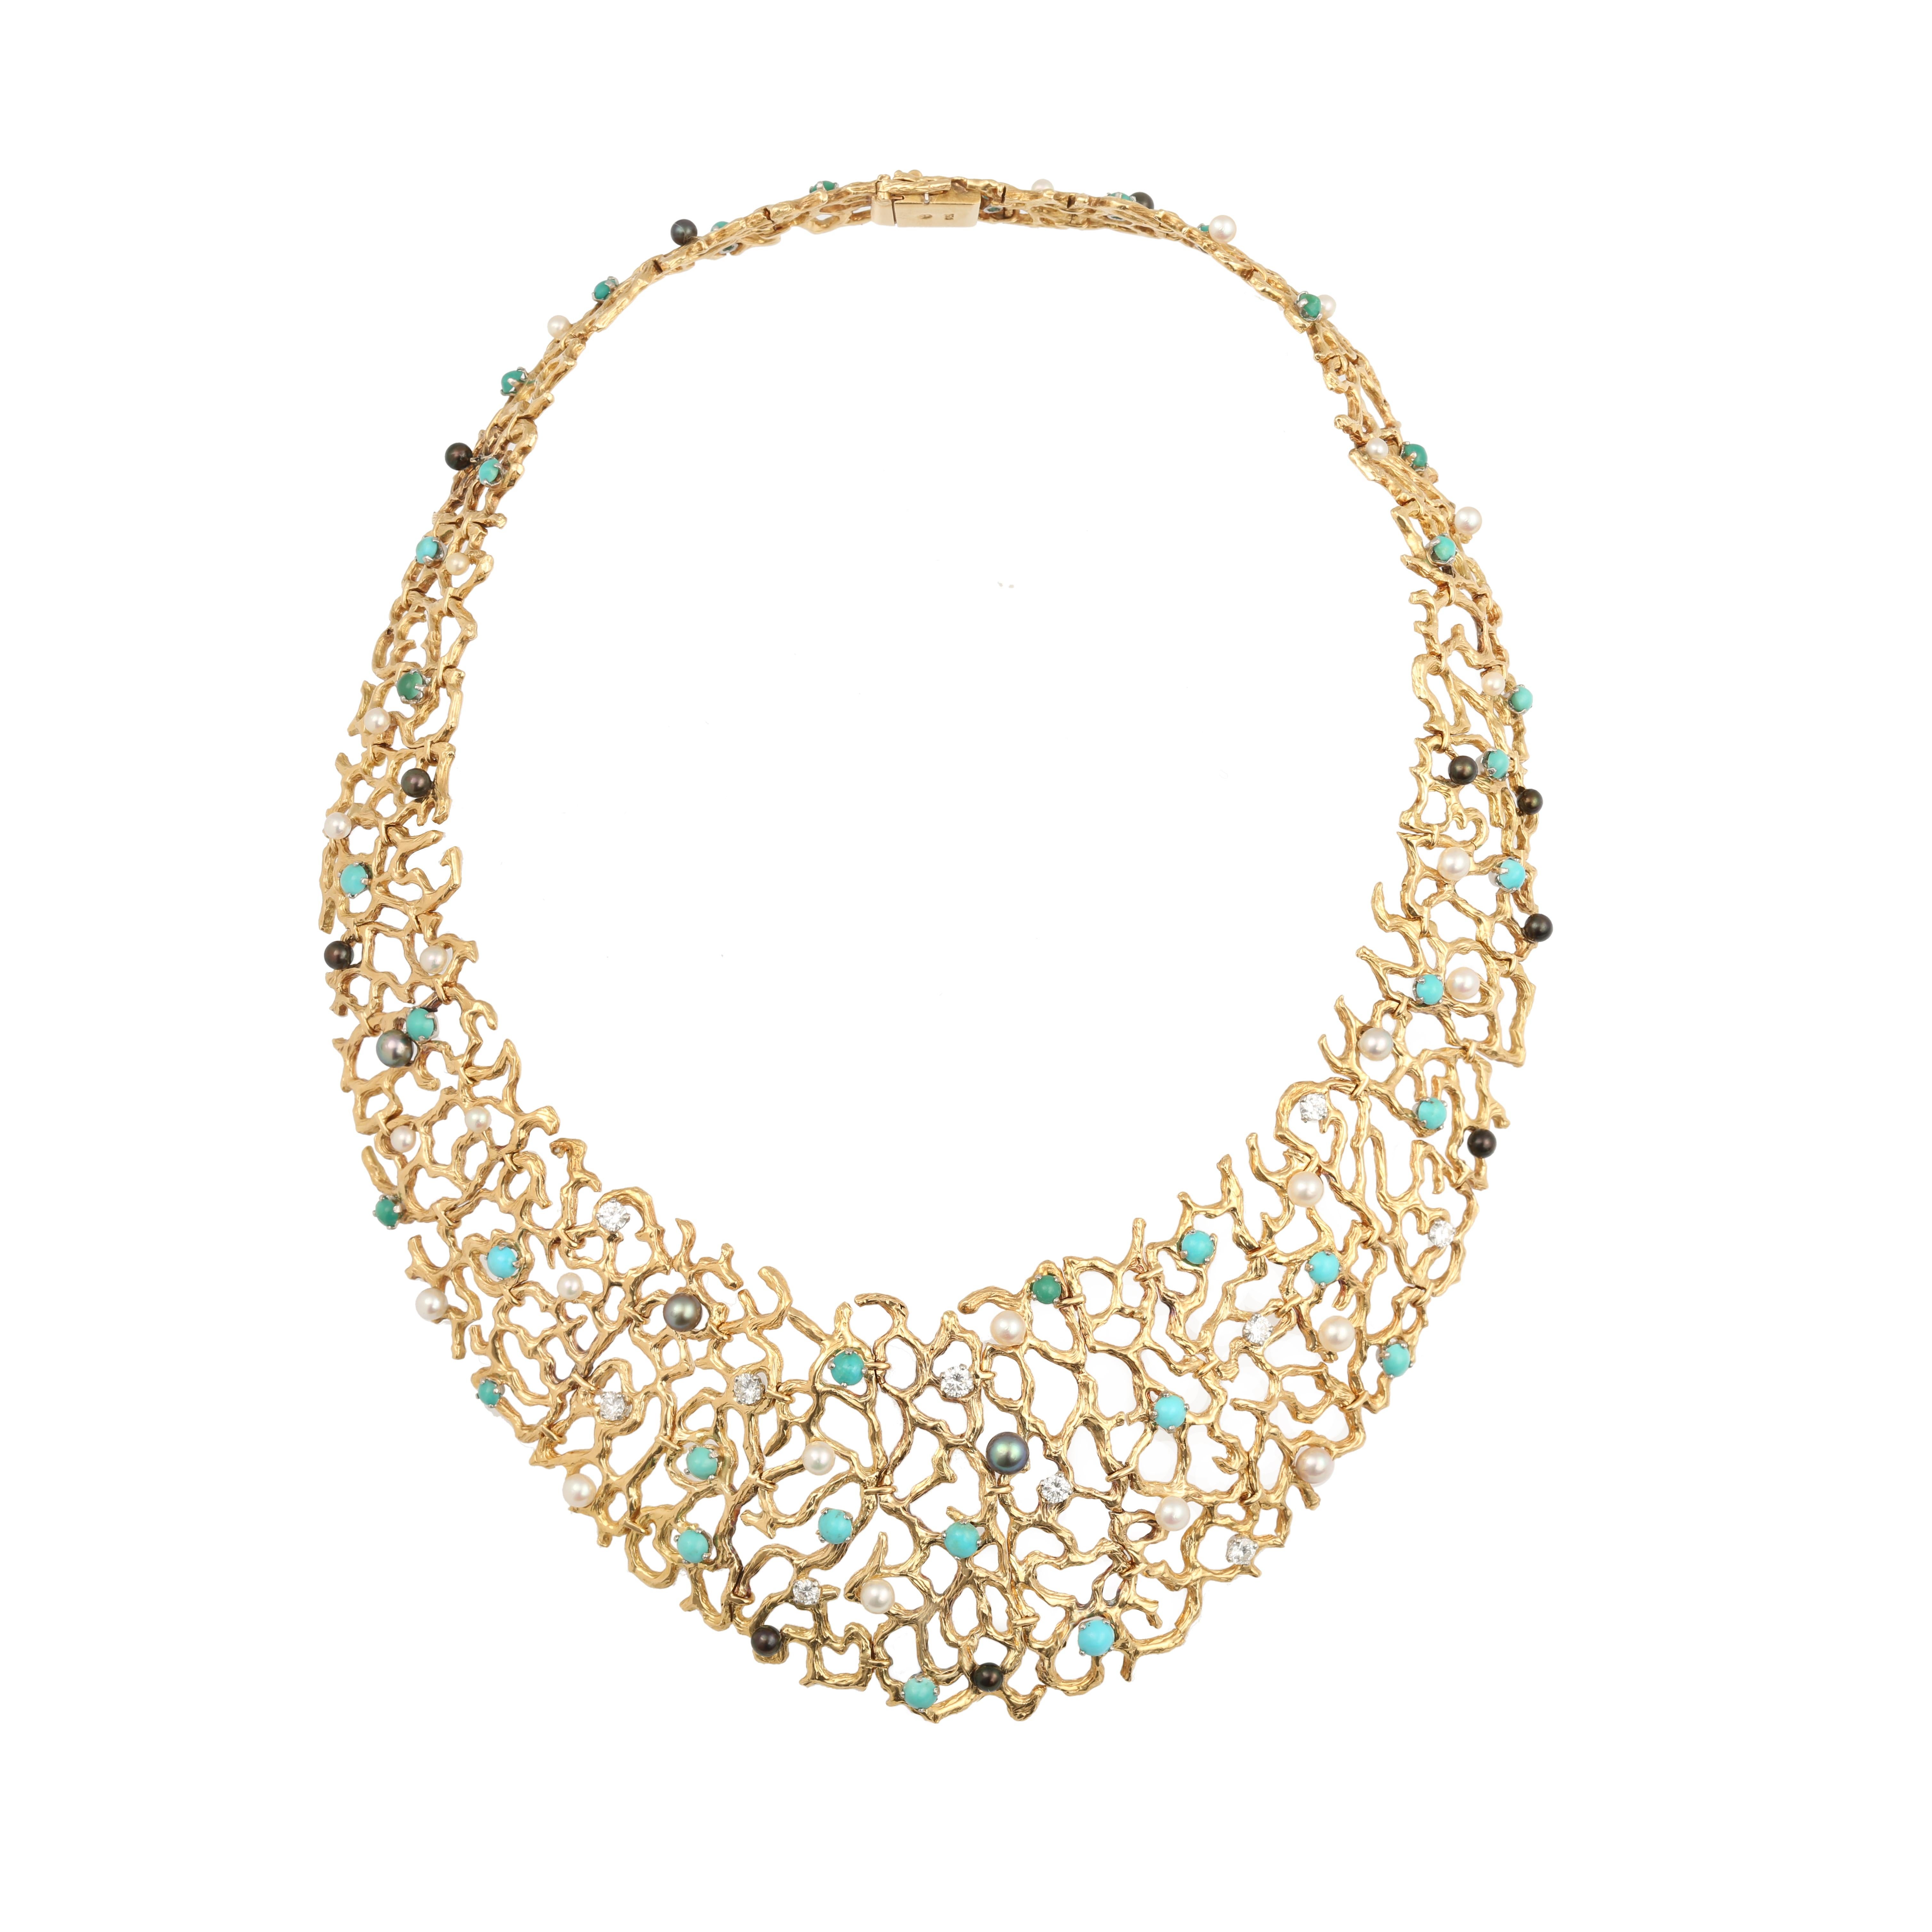 Exceptional half set signed Gilbert Albert composed of a necklace and a pair of ear clips, in yellow gold set with turquoise, diamonds and pearls

Total estimated weight of the diamonds of the necklace : 1.20 carats

Total estimated weight of the